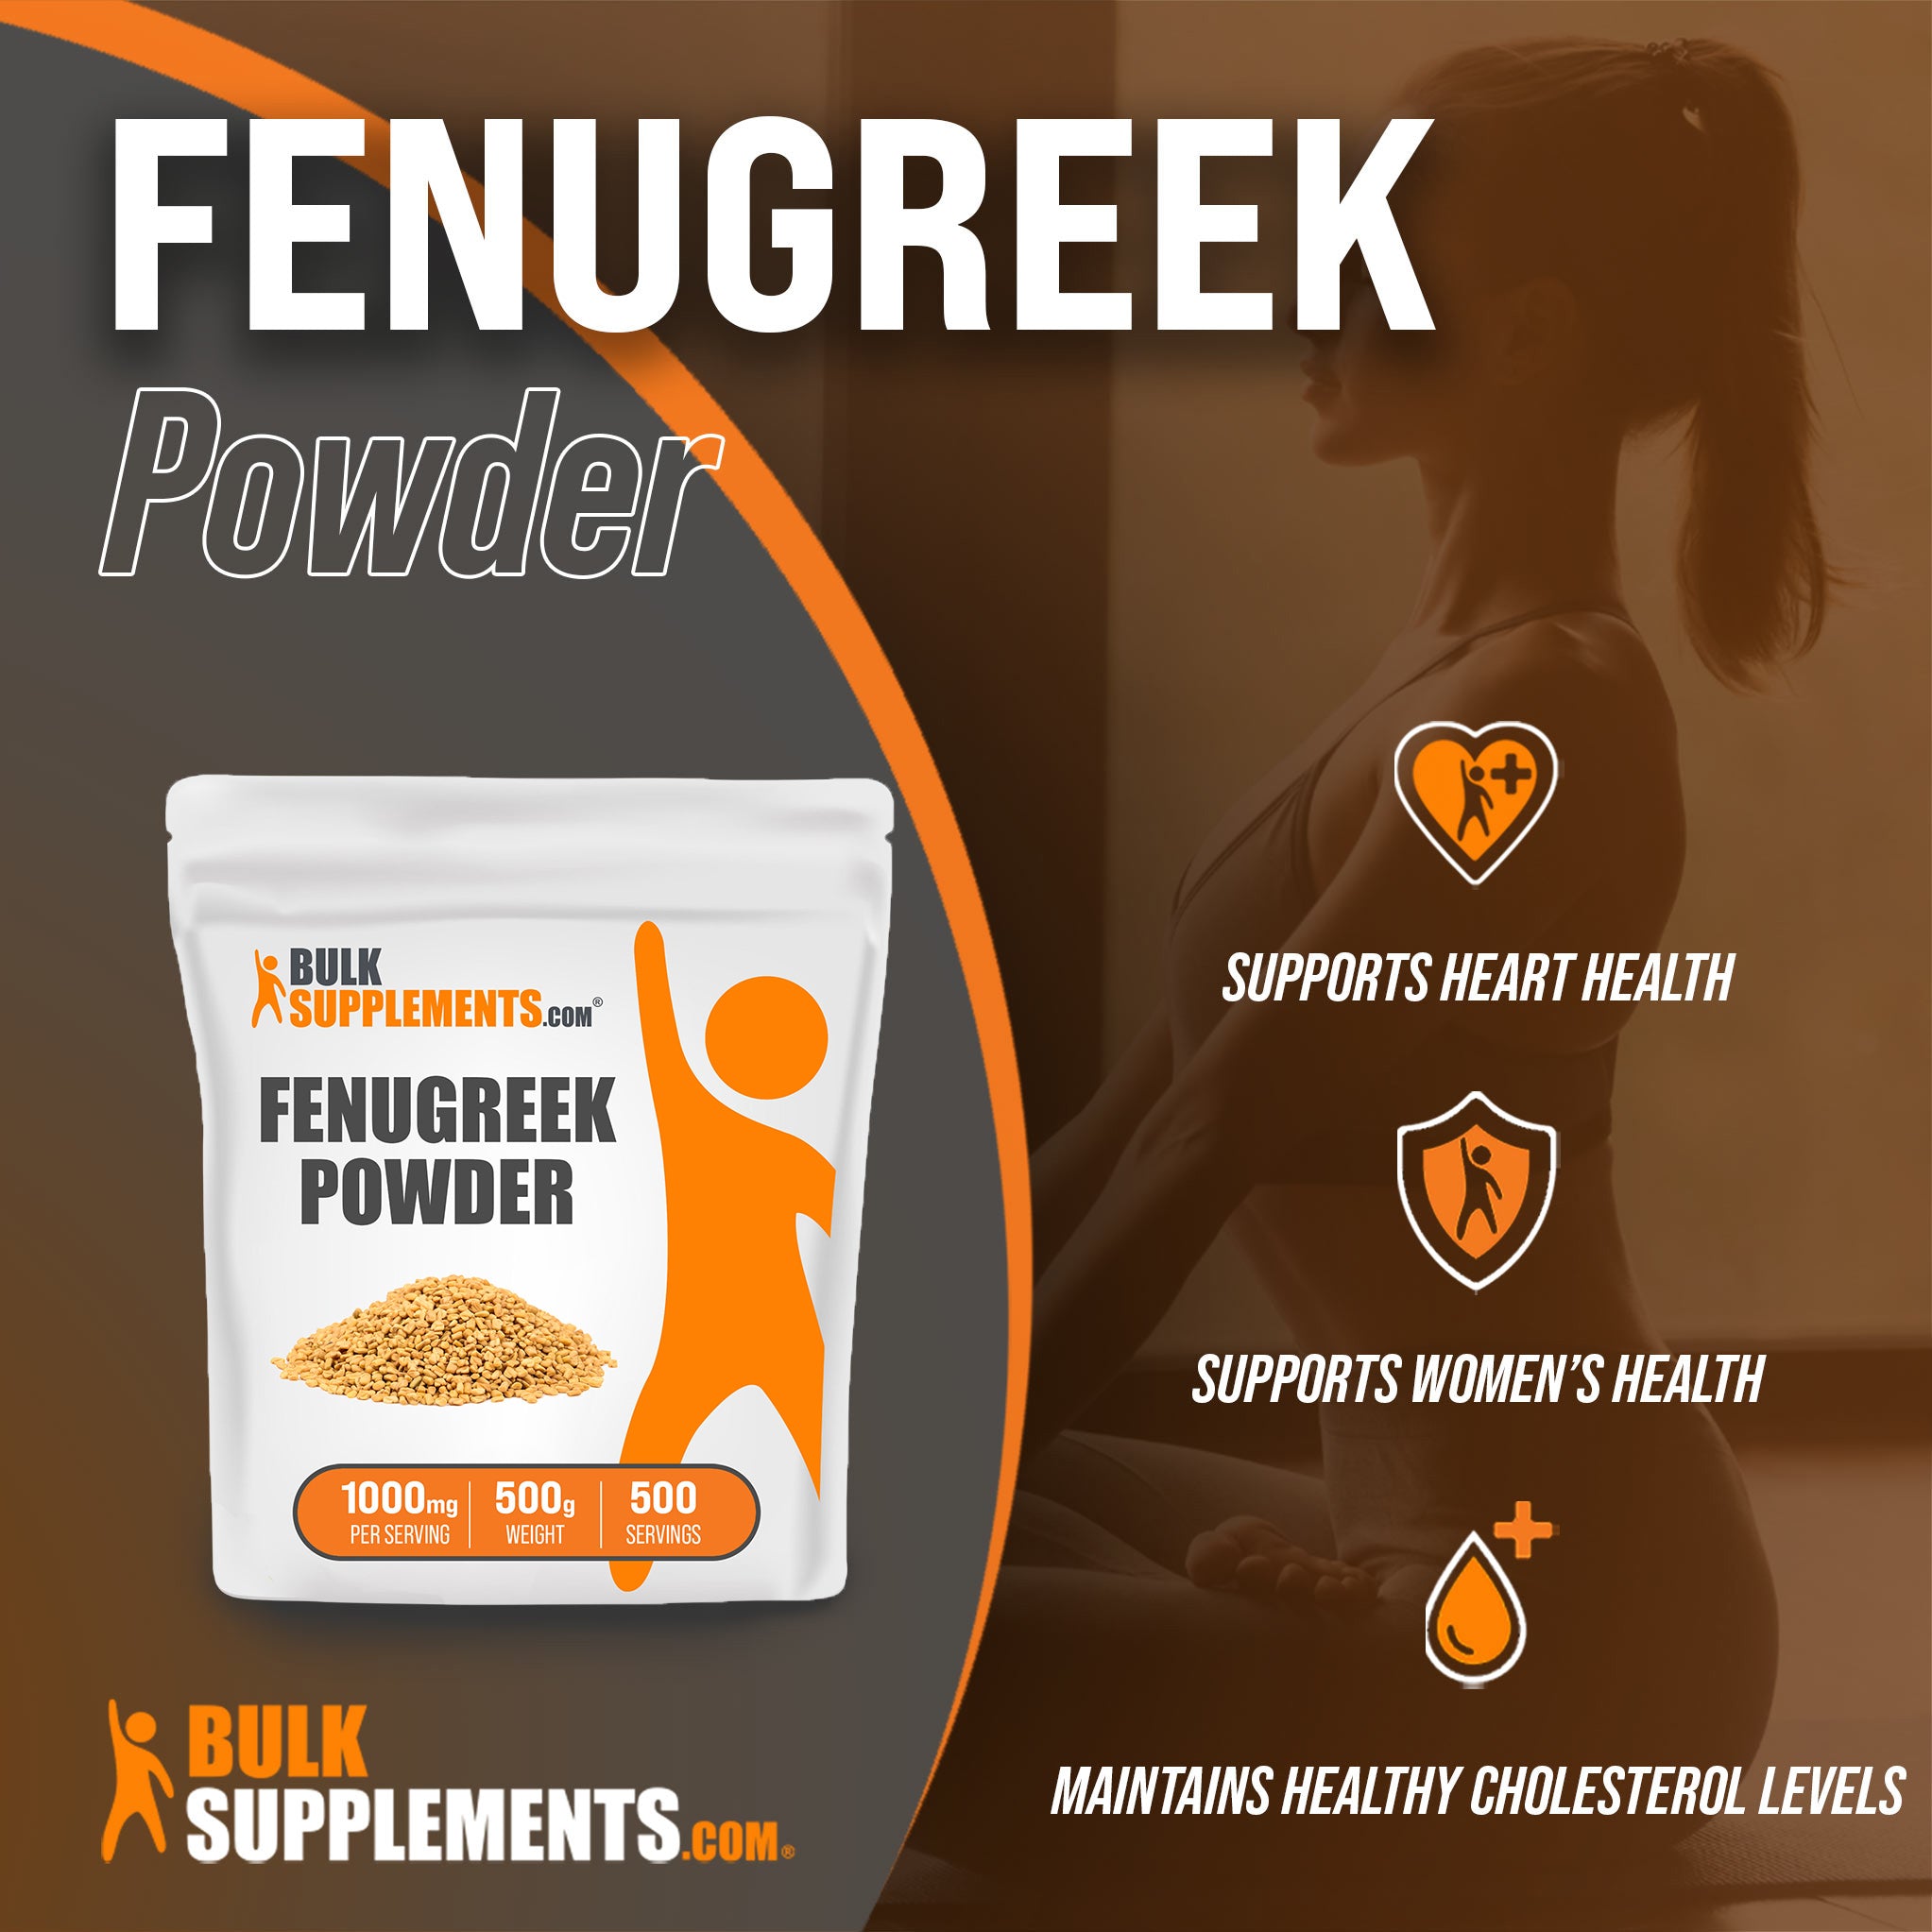 Benefits of Fenugreek; supports heart health, supports women's health, maintains healthy cholesterol levels